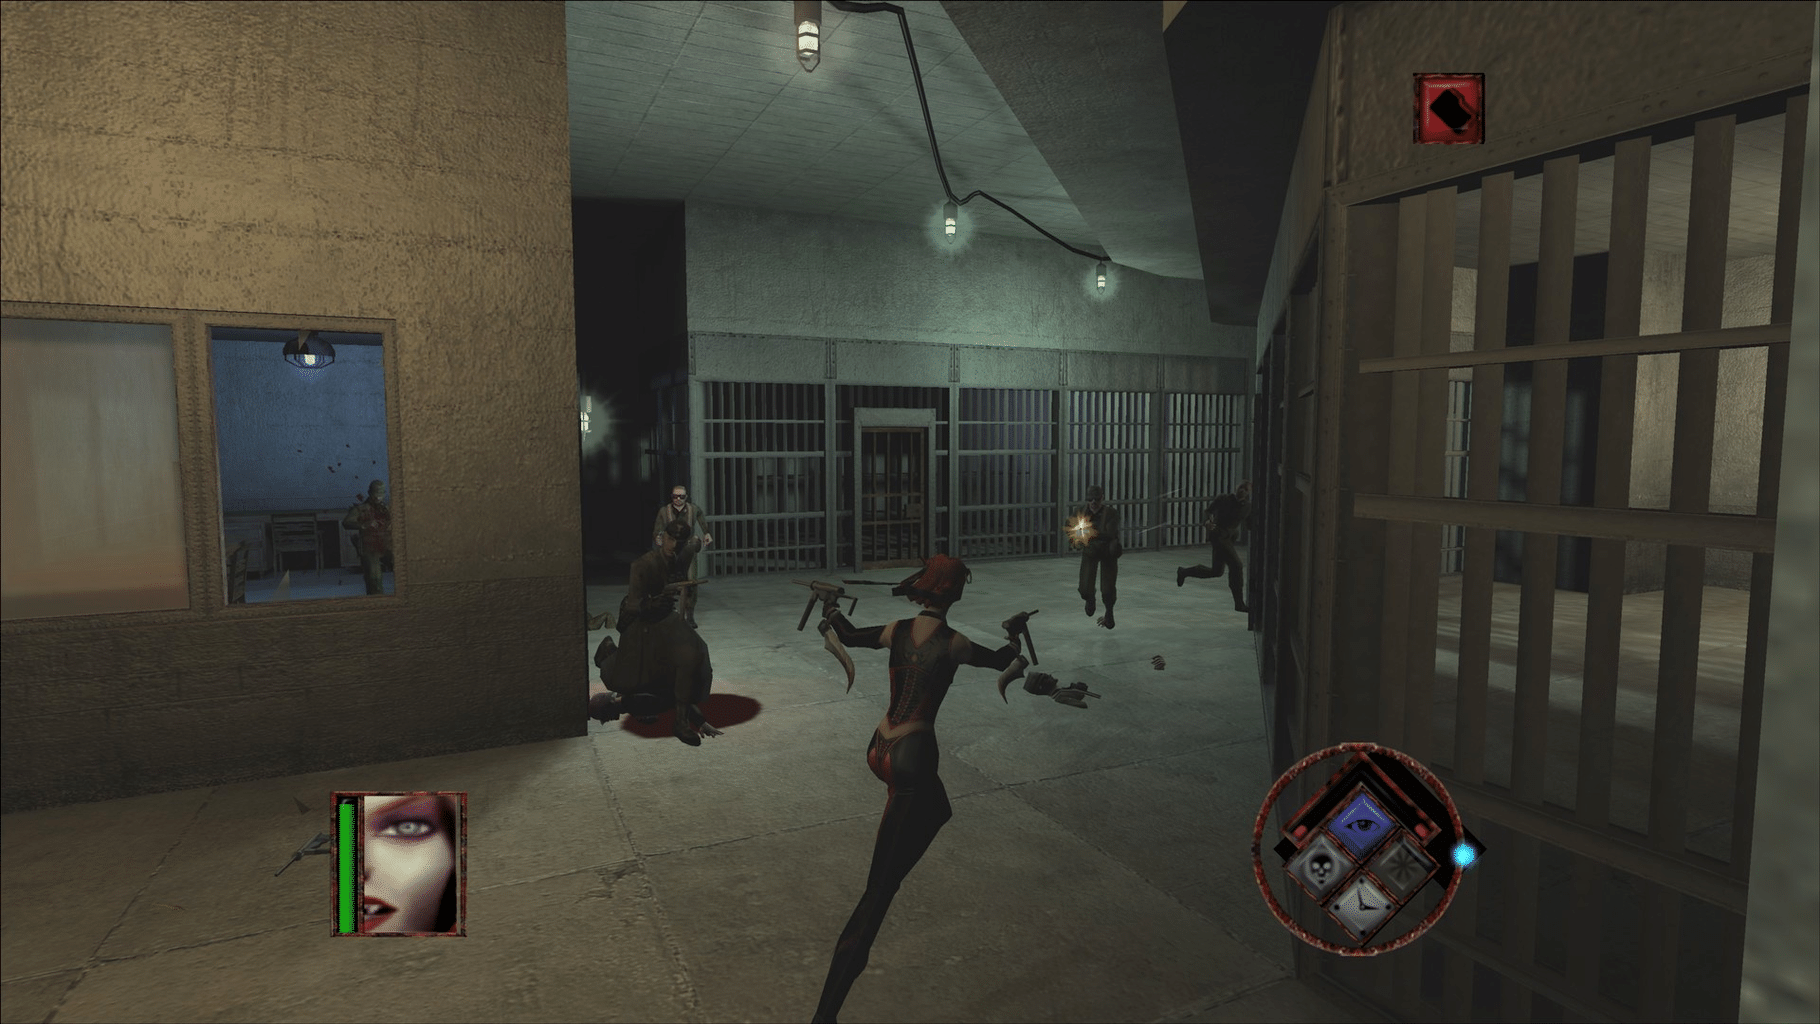 Is BloodRayne: Terminal Cut playable on any cloud gaming services?